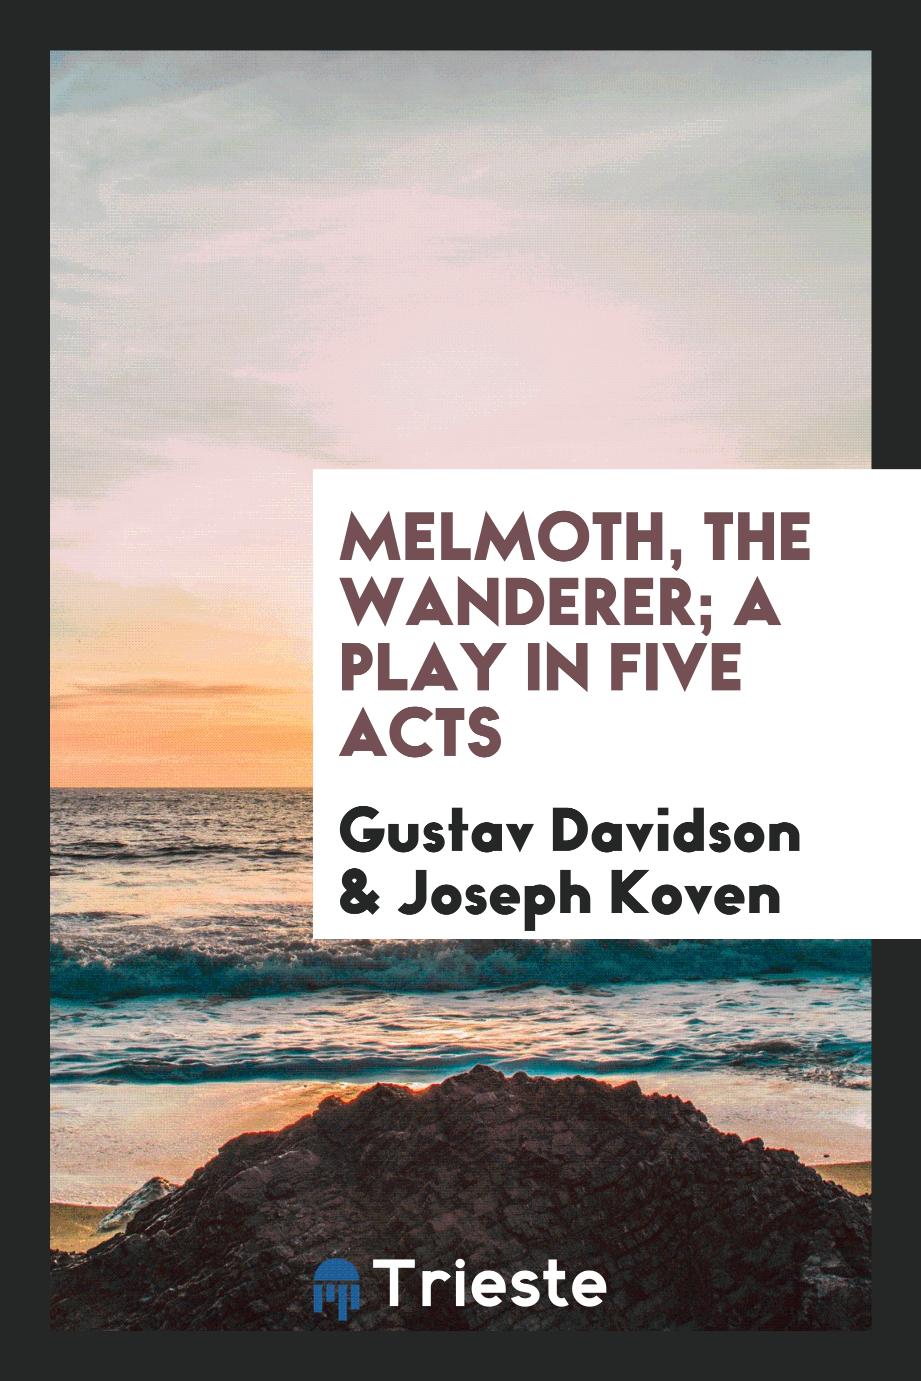 Melmoth, the wanderer; a play in five acts